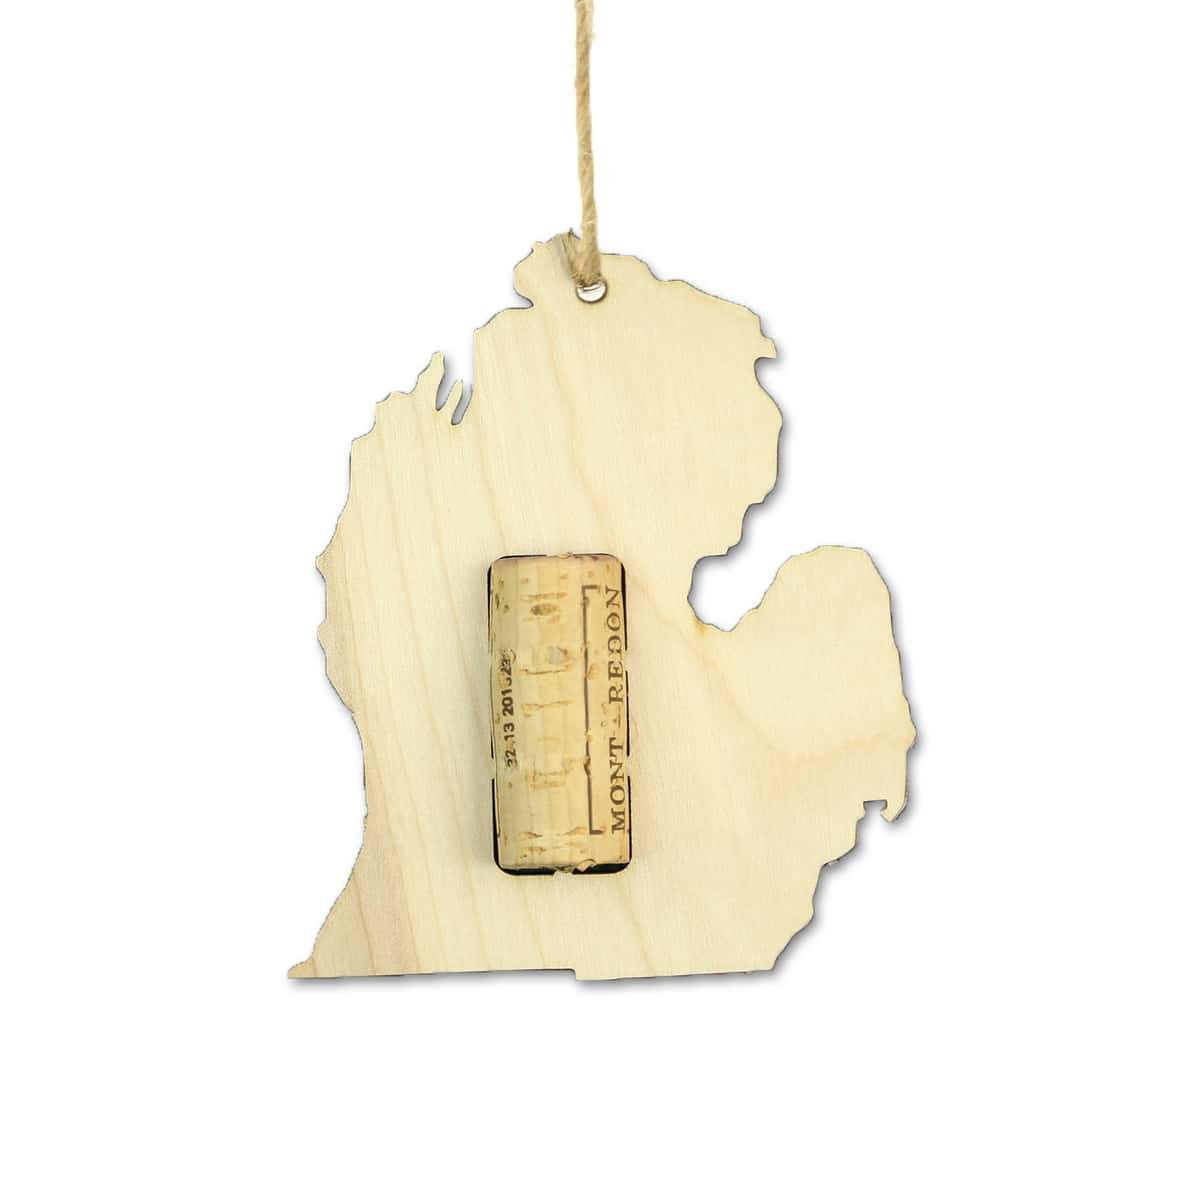 Torched Products Wine Cork Holder Michigan Wine Cork Holder Ornaments (781201244277)